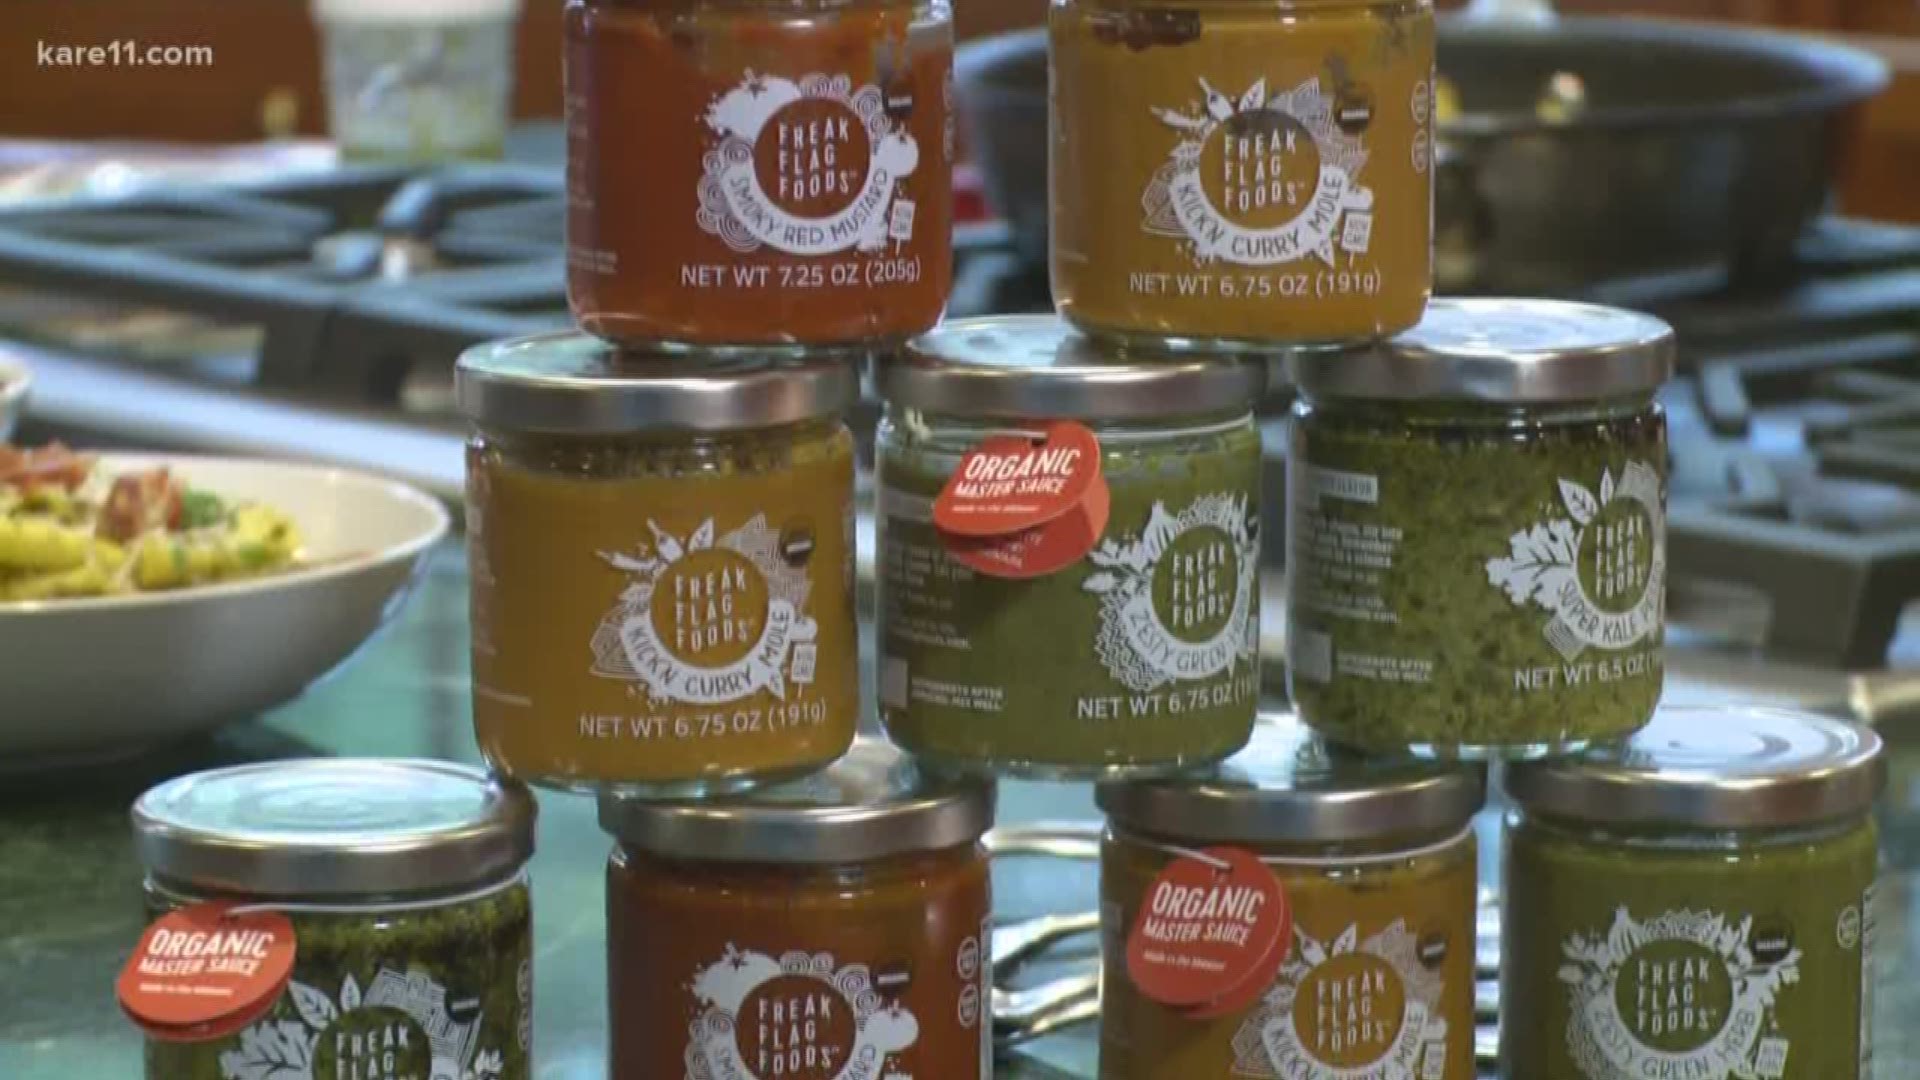 The Minneapolis-based company created four organic master sauces that can be used as a base for recipes or on its own.